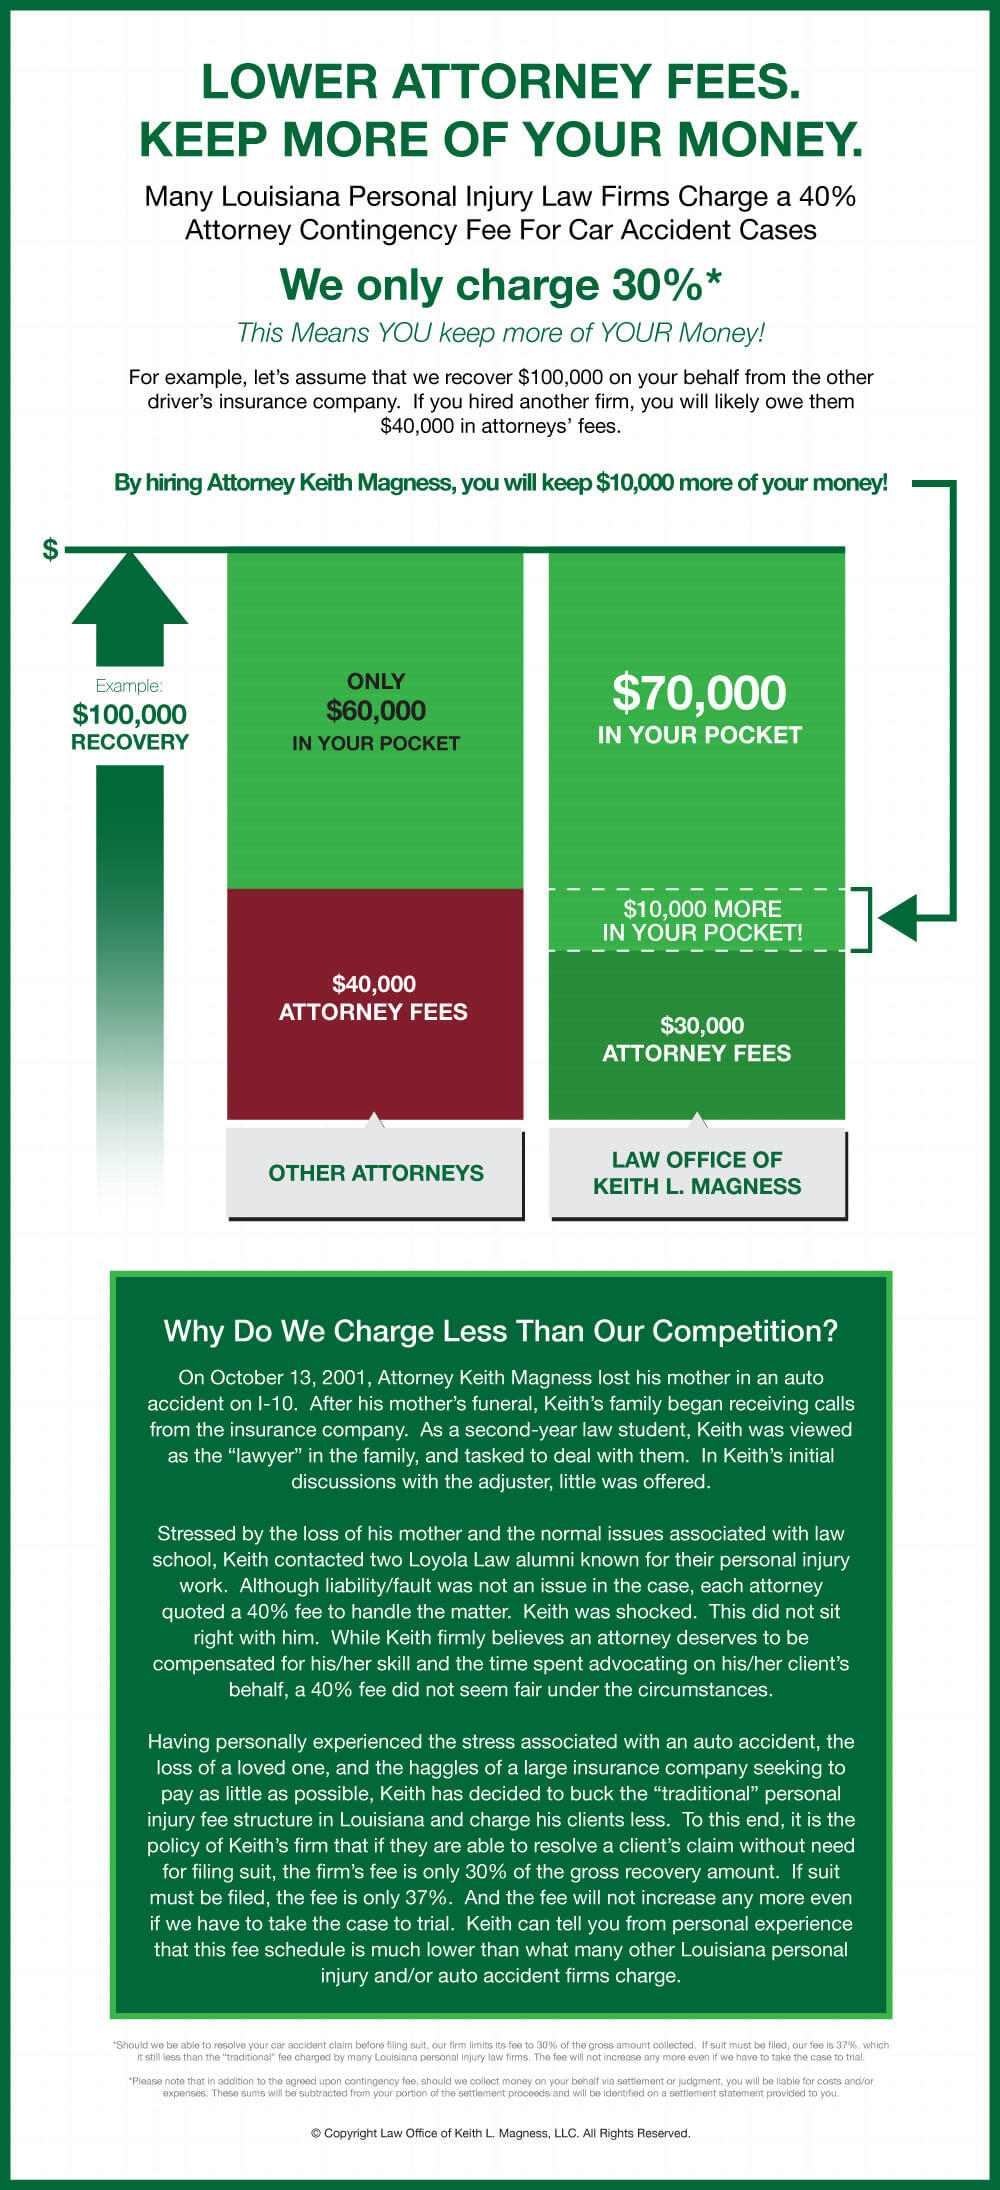 infographic comparison of fees charged by New Orleans car accident lawyers